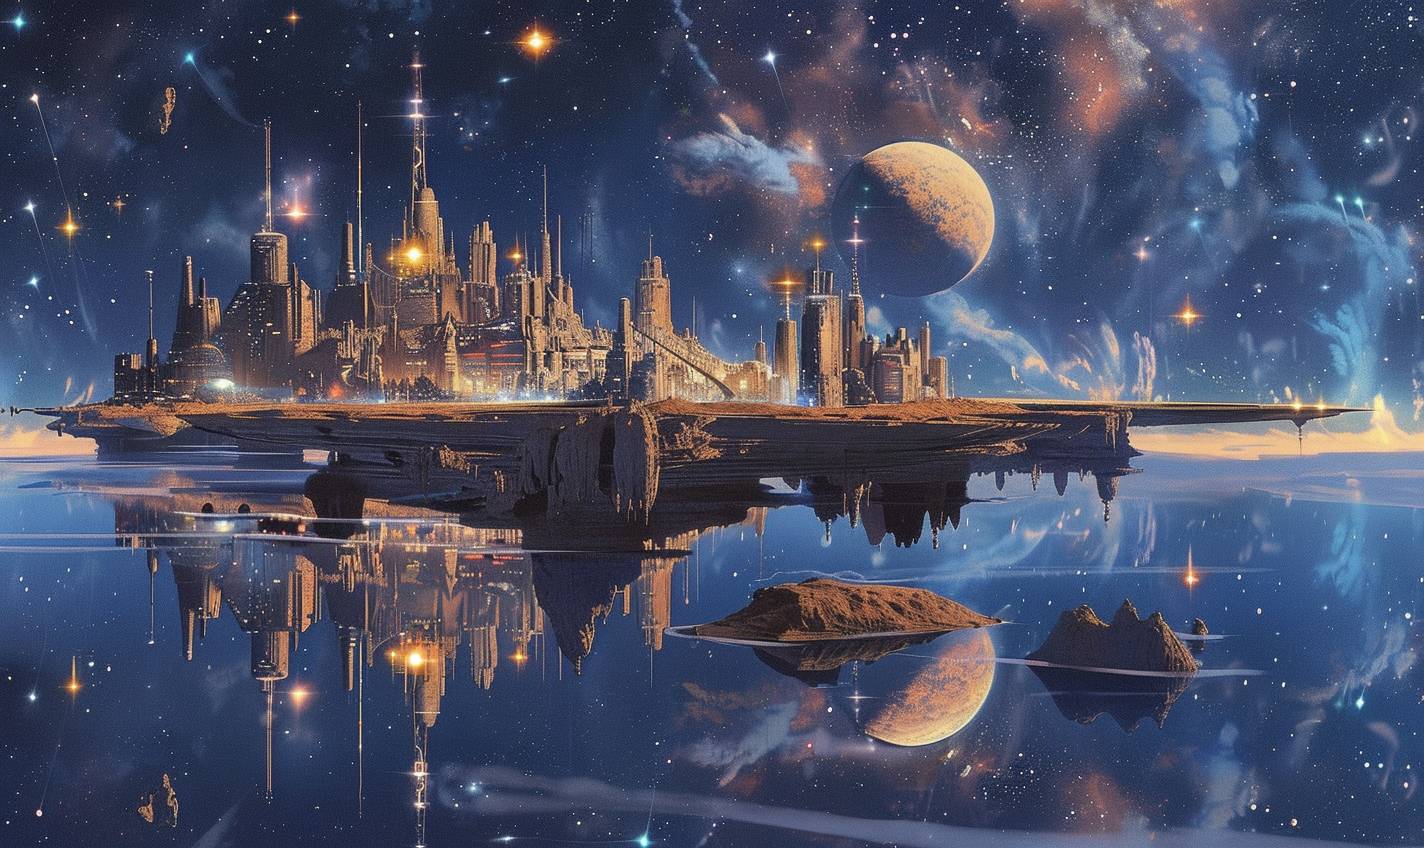 In style of Peter Elson, Celestial city floating among the stars